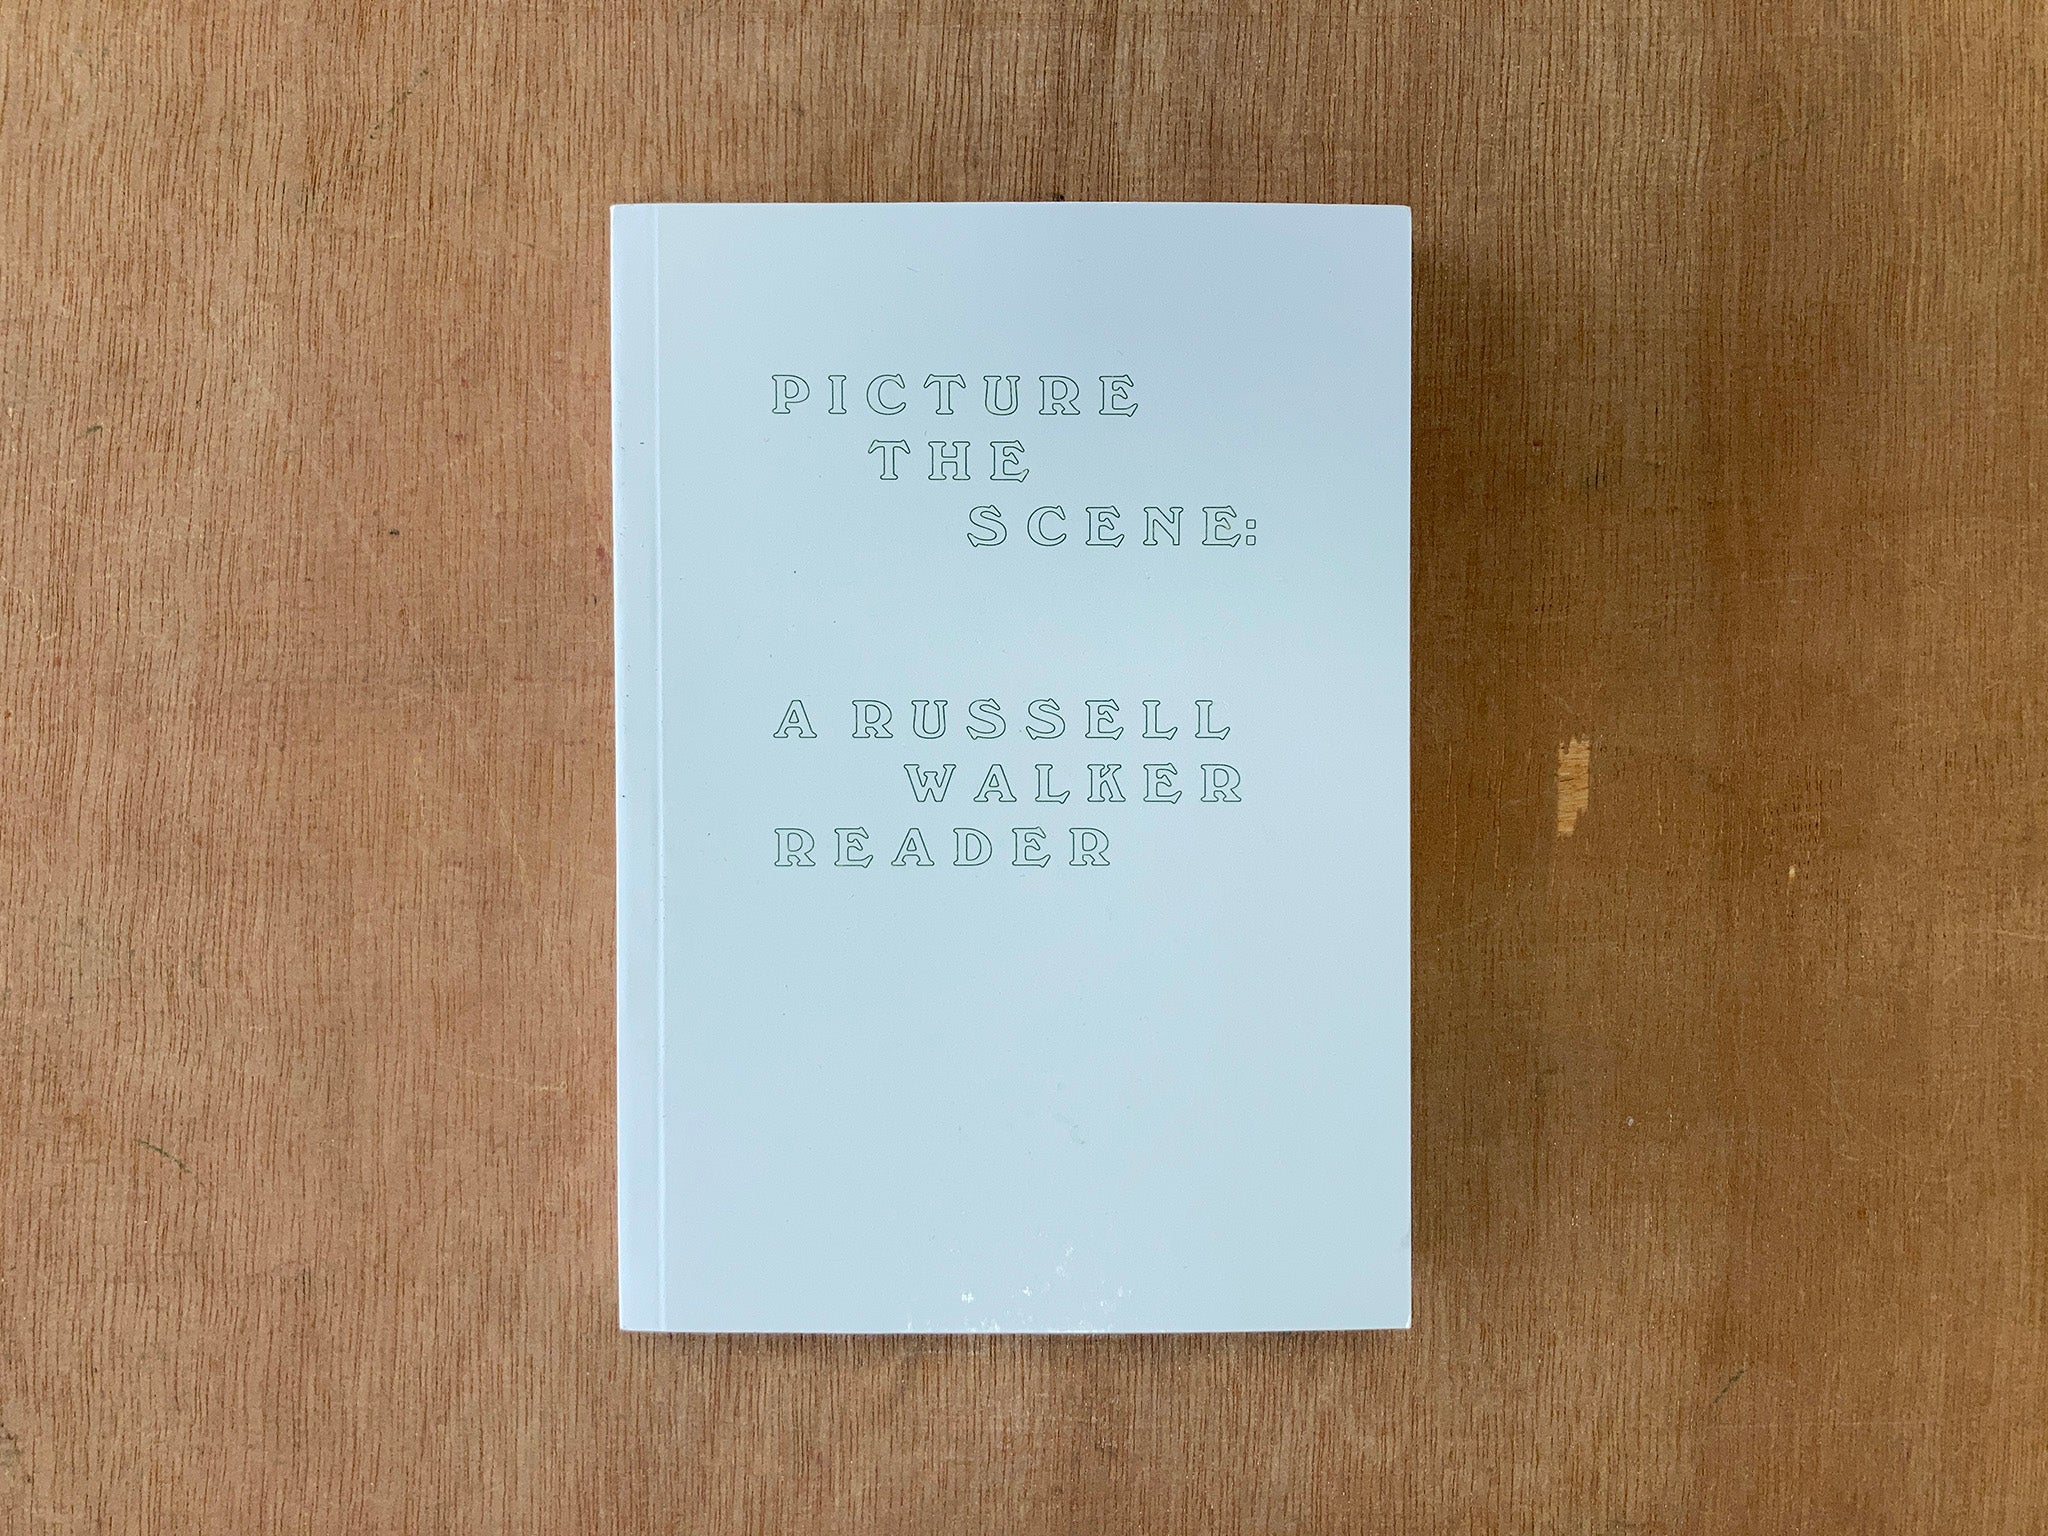 PICTURE THE SCENE: A RUSSELL WALKER READER by Russell Walker